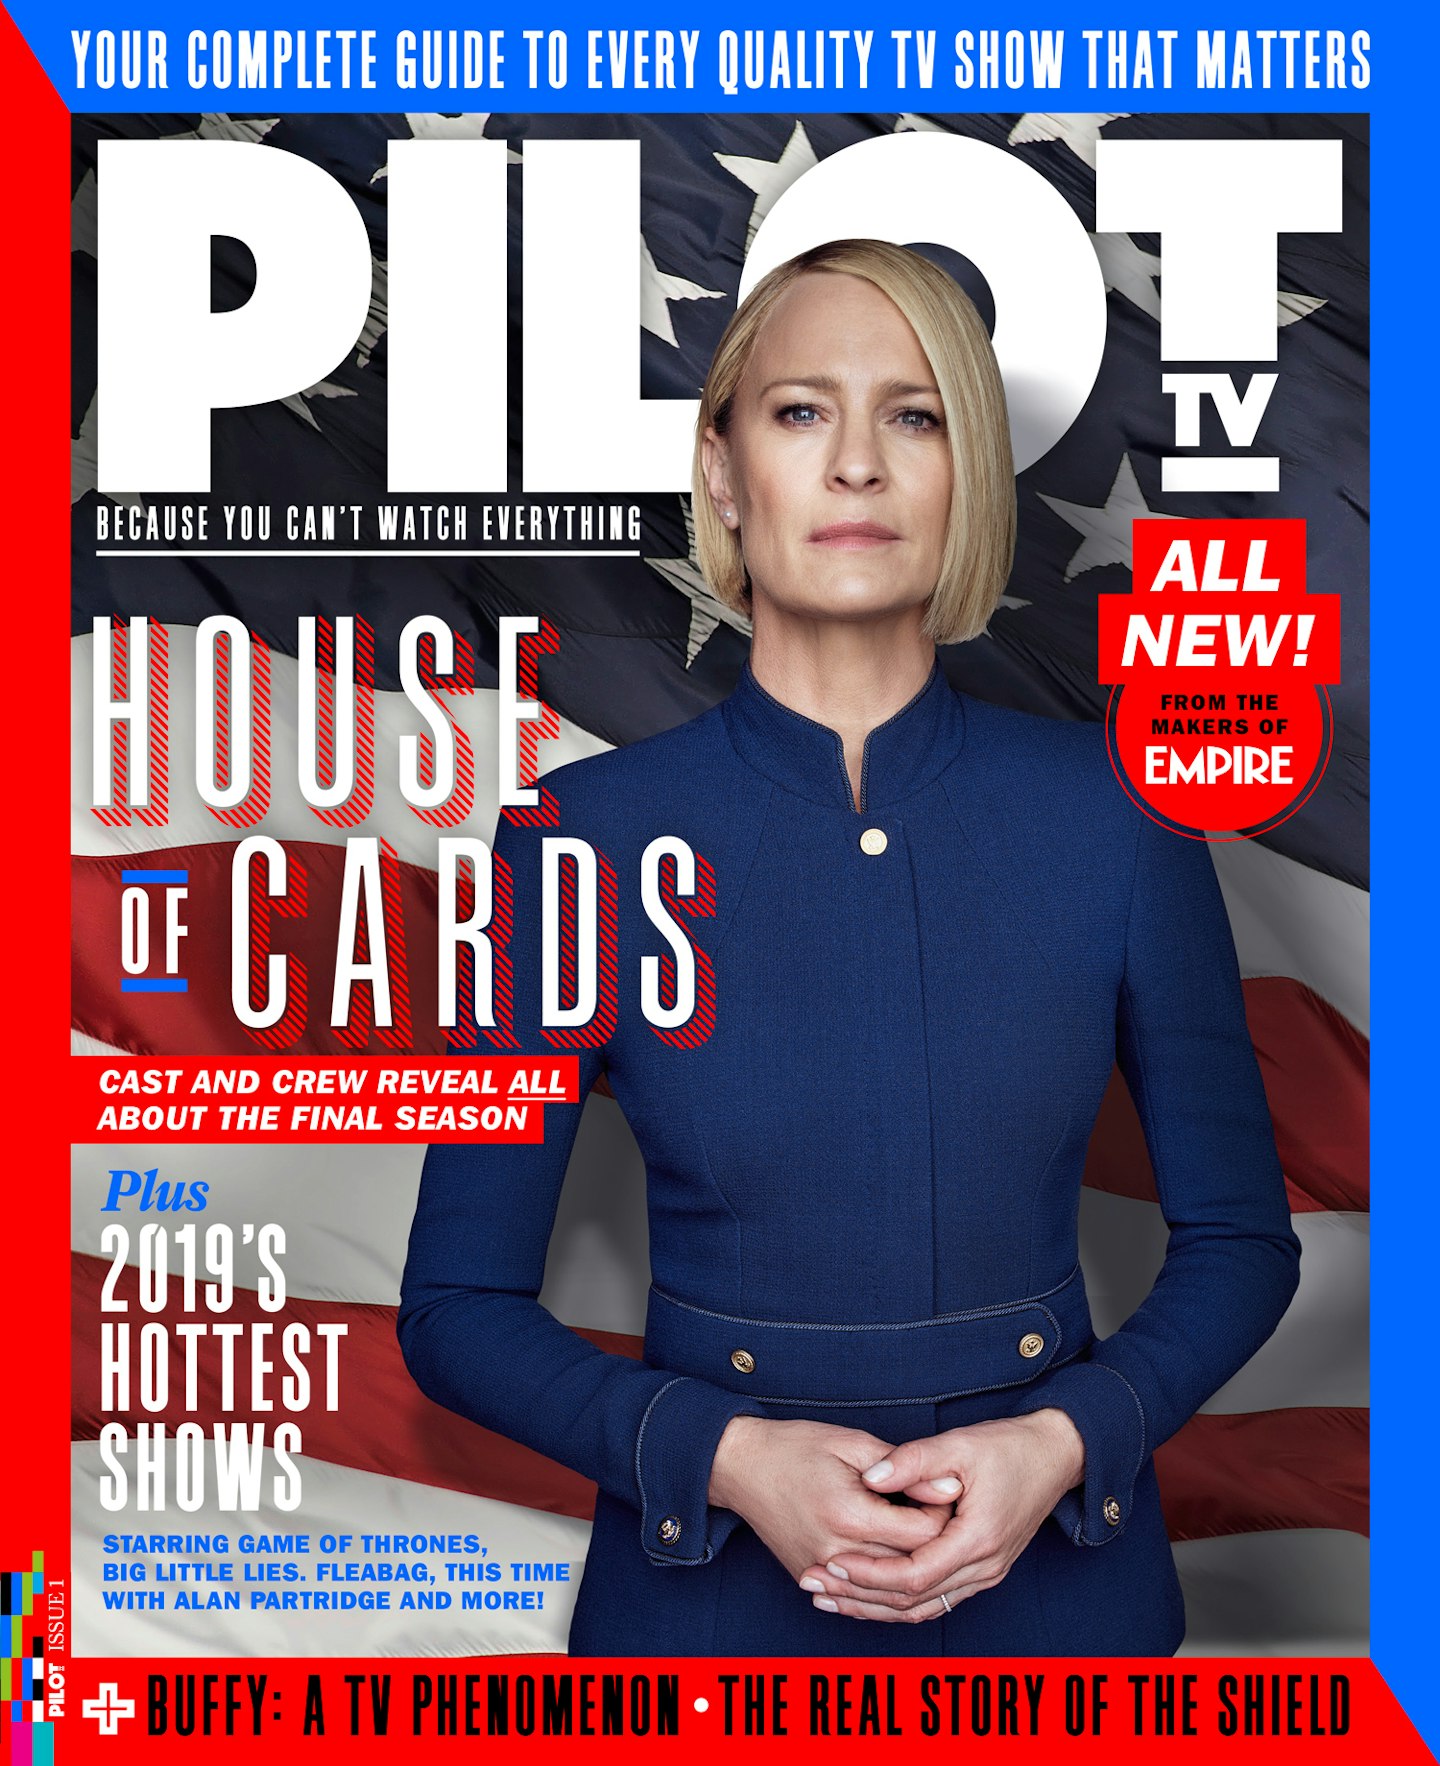 Pilot TV - House of Cards cover